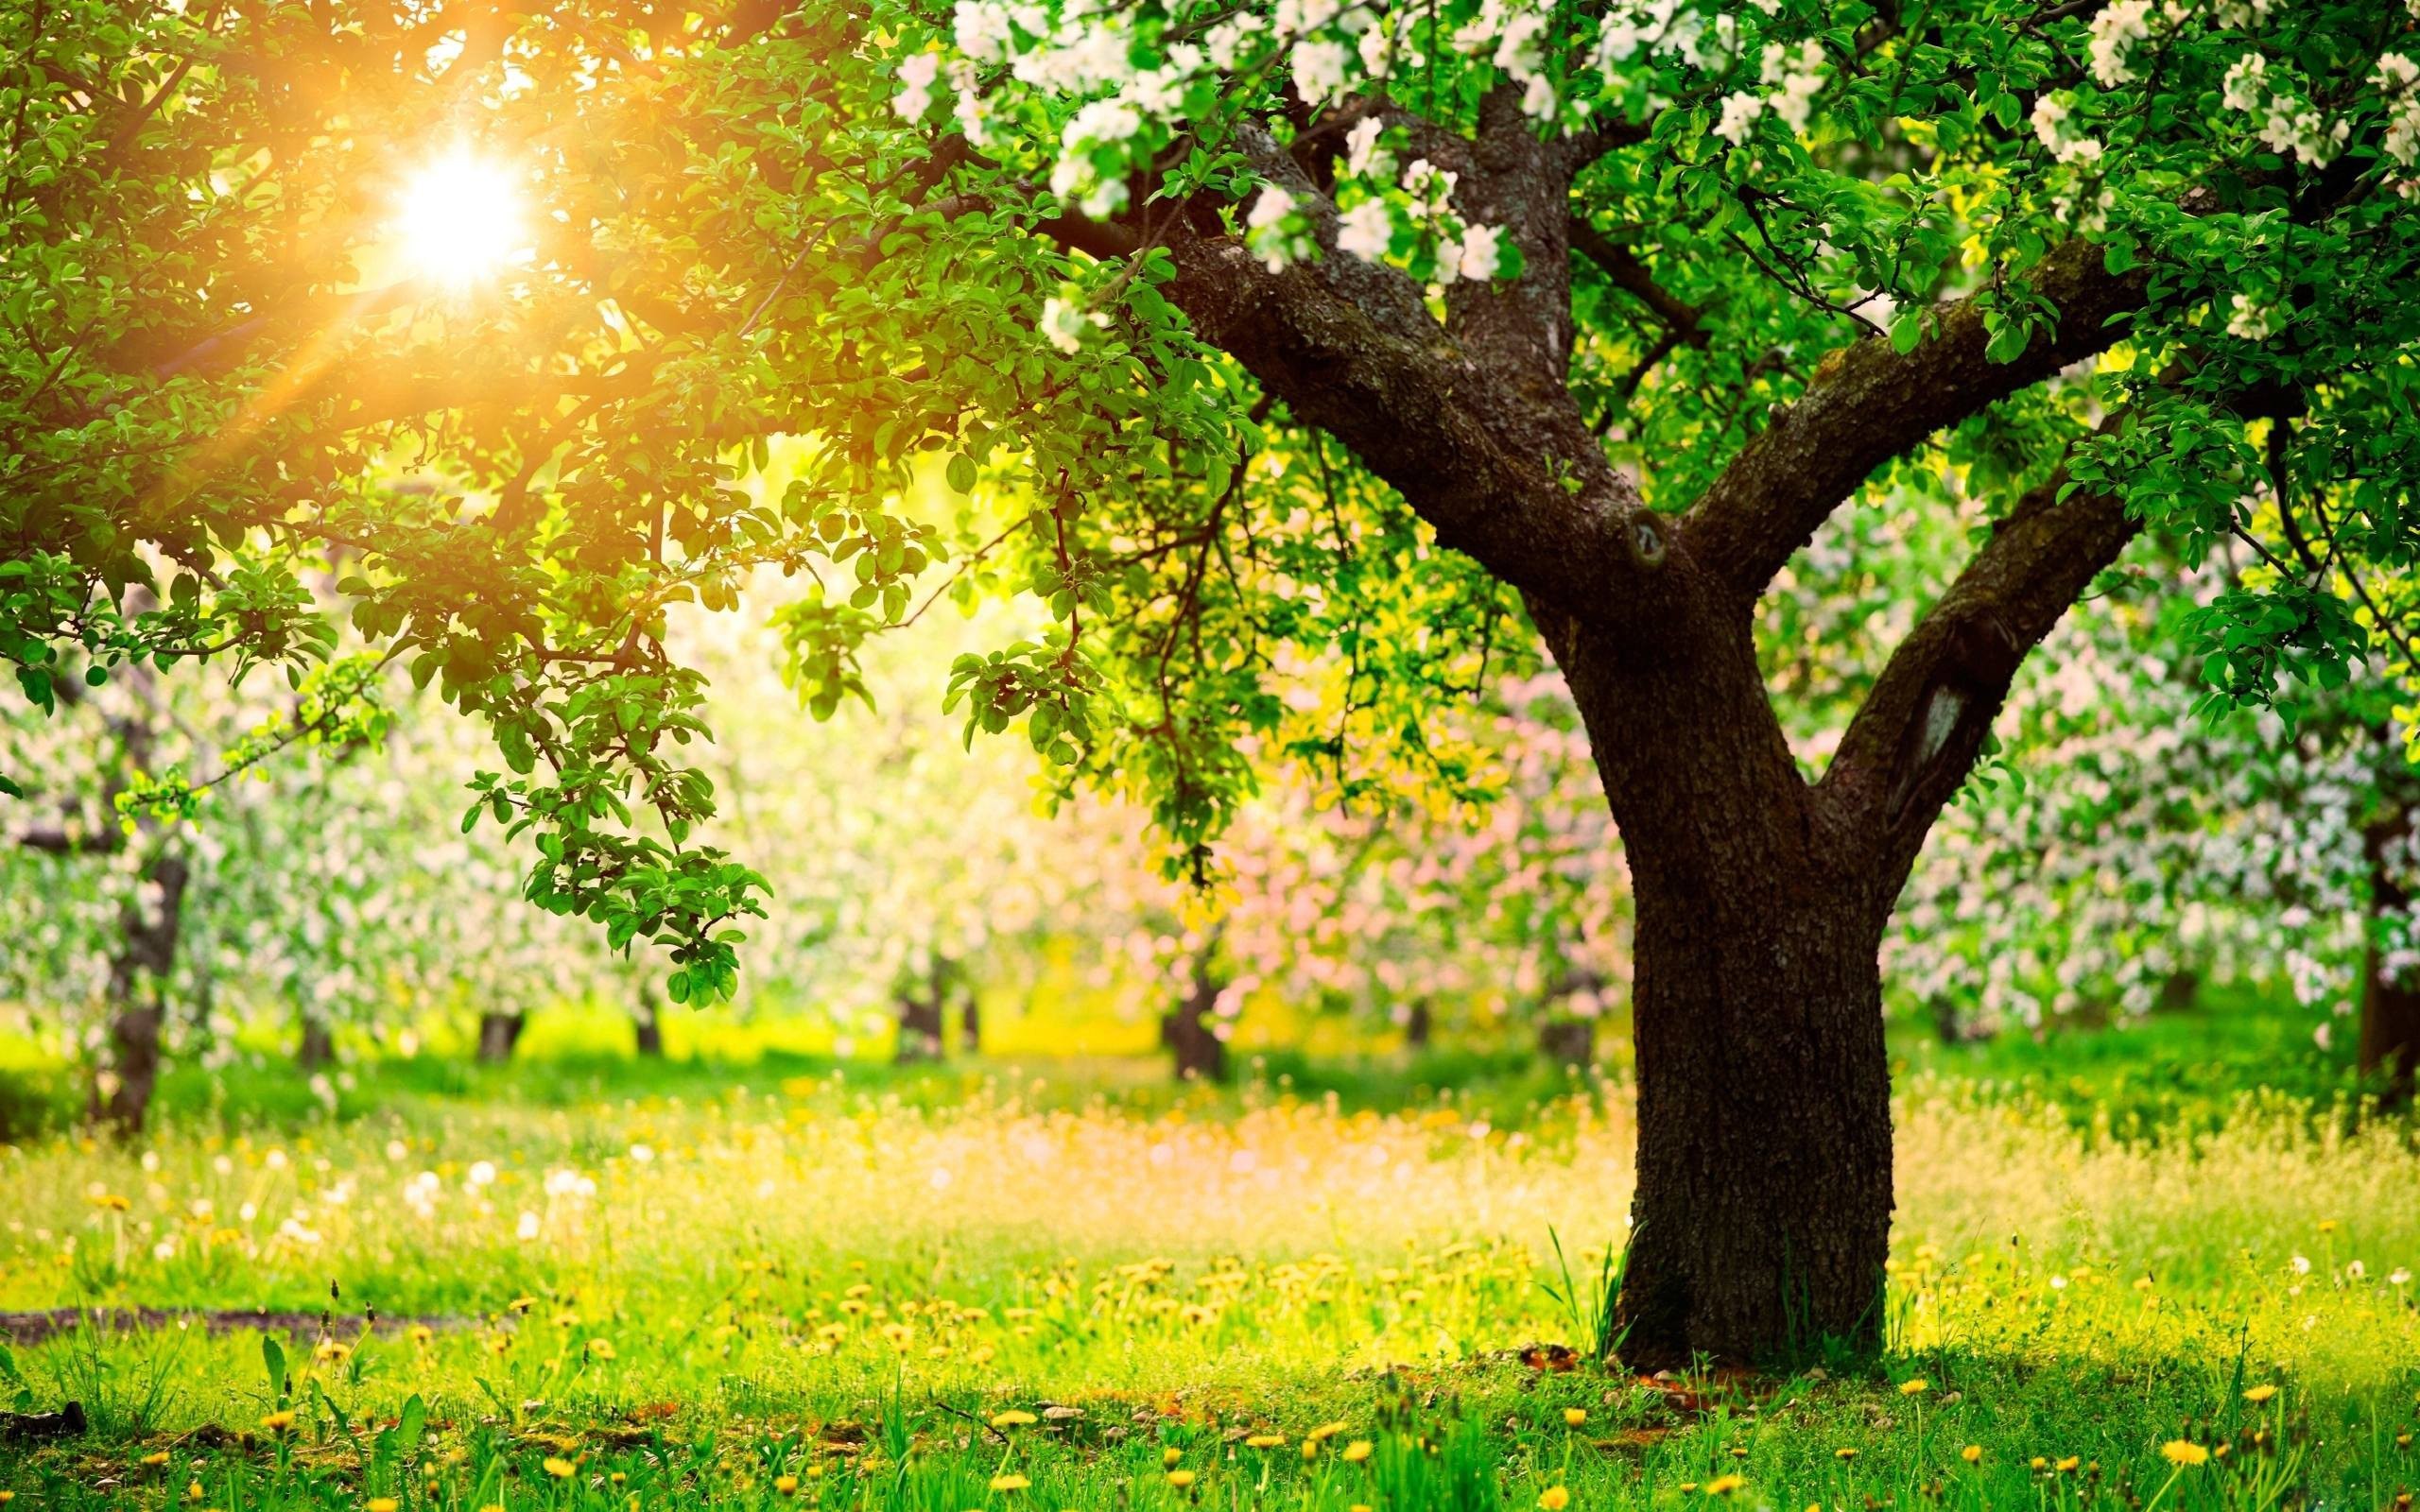 2560x1600 ... New Hd Nature Green Trees Backgrounds 3 Wallpaper Tree Background  Images Afari On New Hd Nature ...